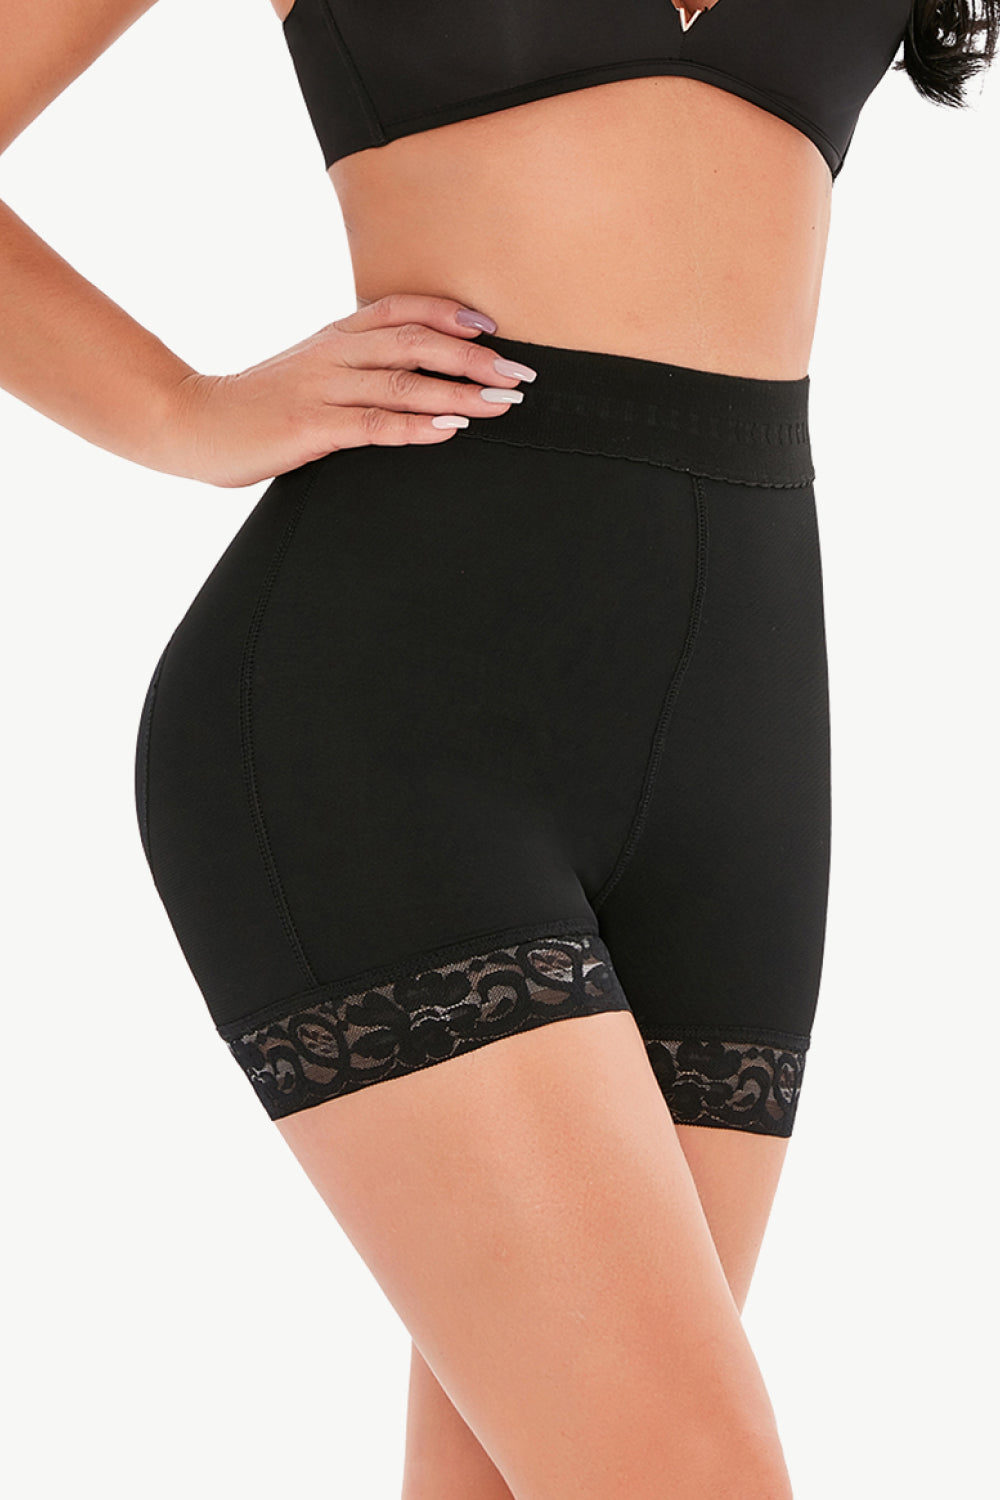 Full Size Pull-On Lace Trim Shaping Shorts - Shapewear - FITGGINS